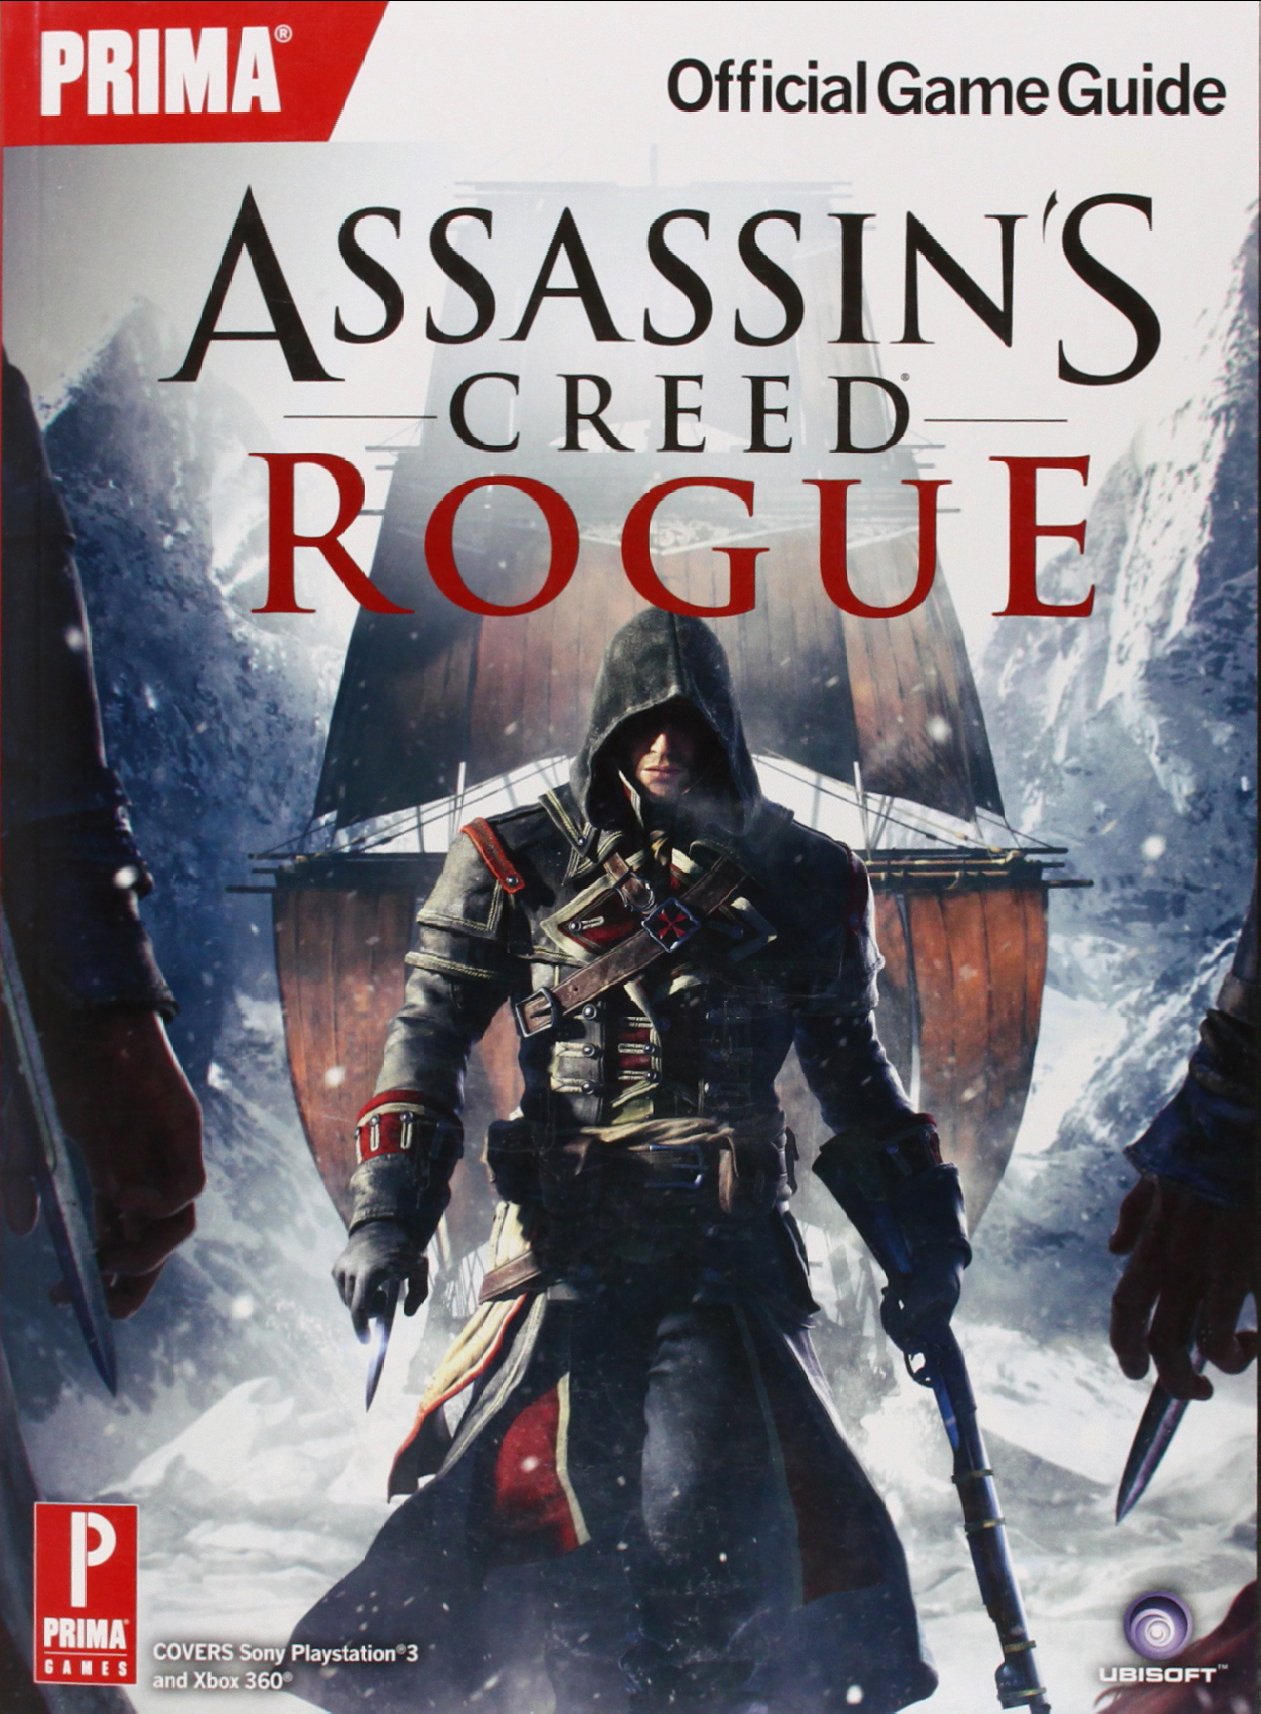 Assassins Creed: Rogue – Tips and Tricks For Abstergo Challenges & Trophies